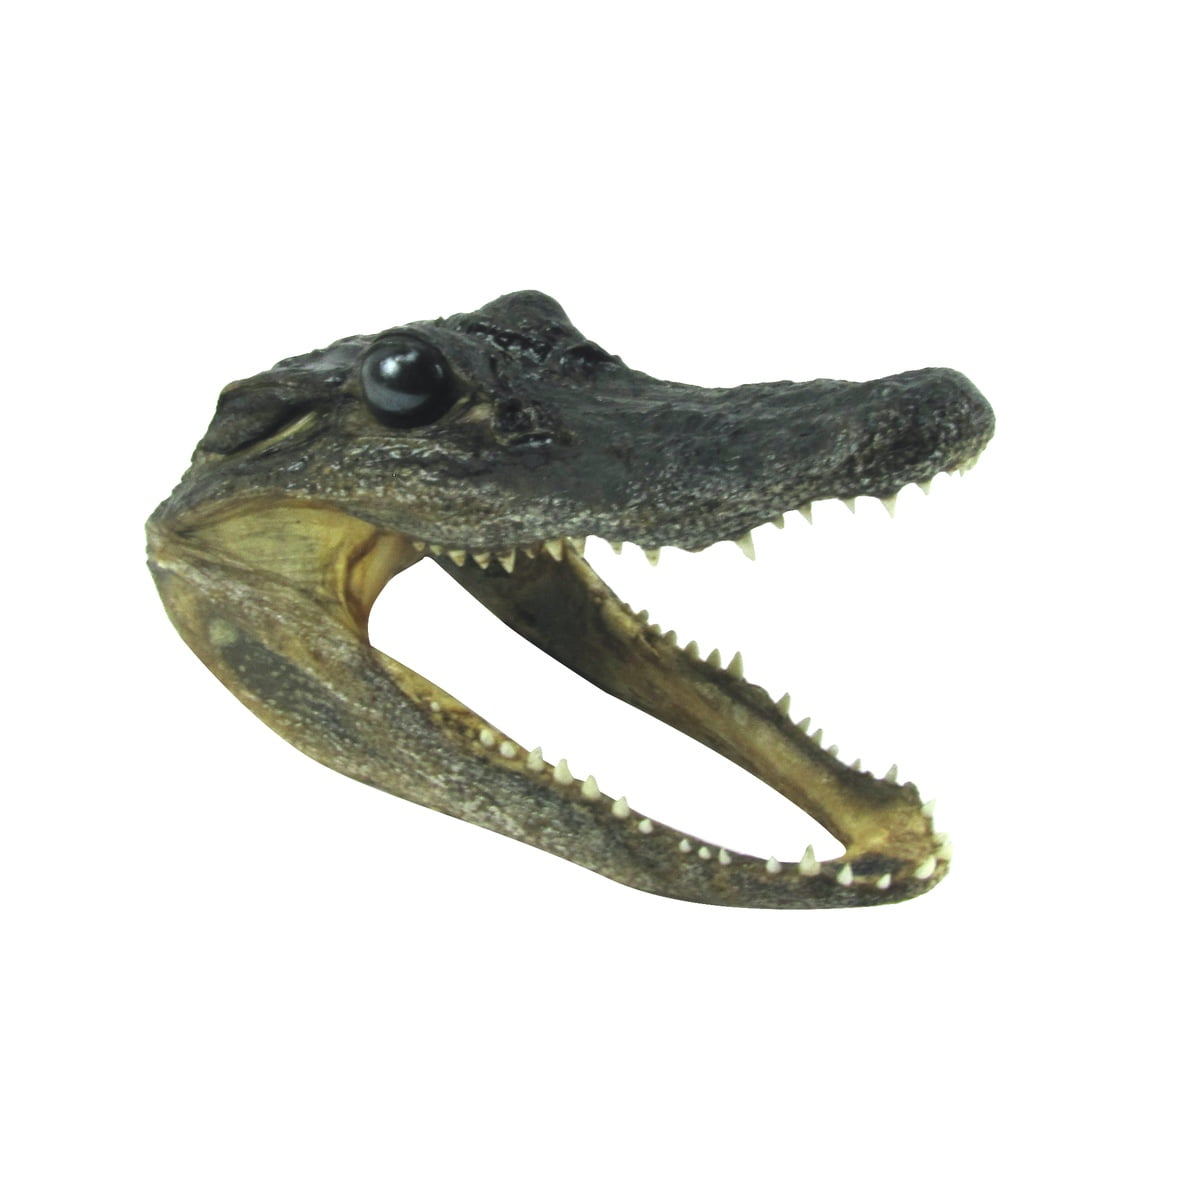 25 Count Gator Skull Rearview Mirror Hanging Ornament by Skullz for sale online 